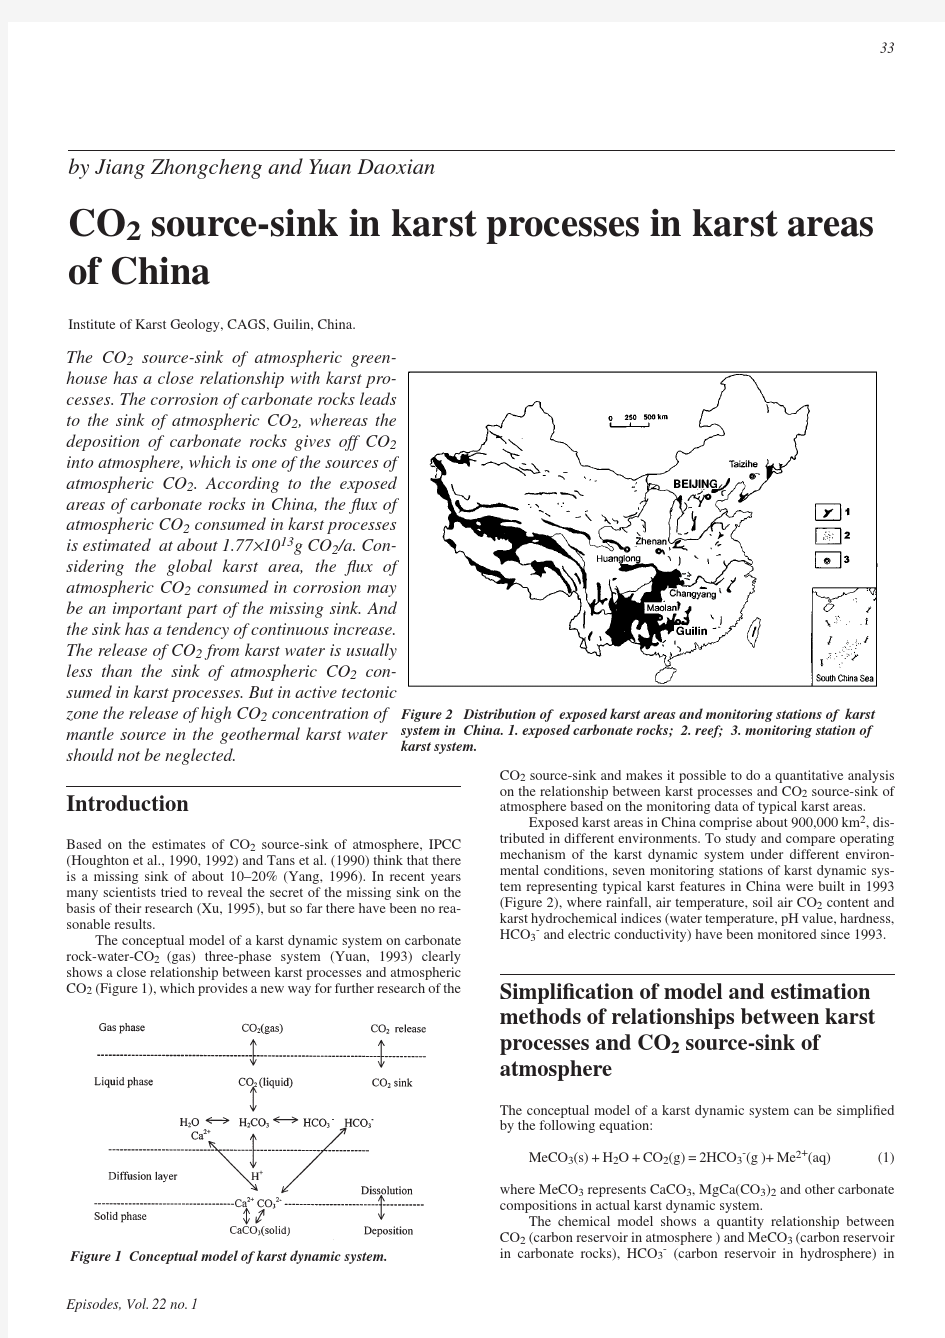 CO2 source-sink in karst processes in karst areas